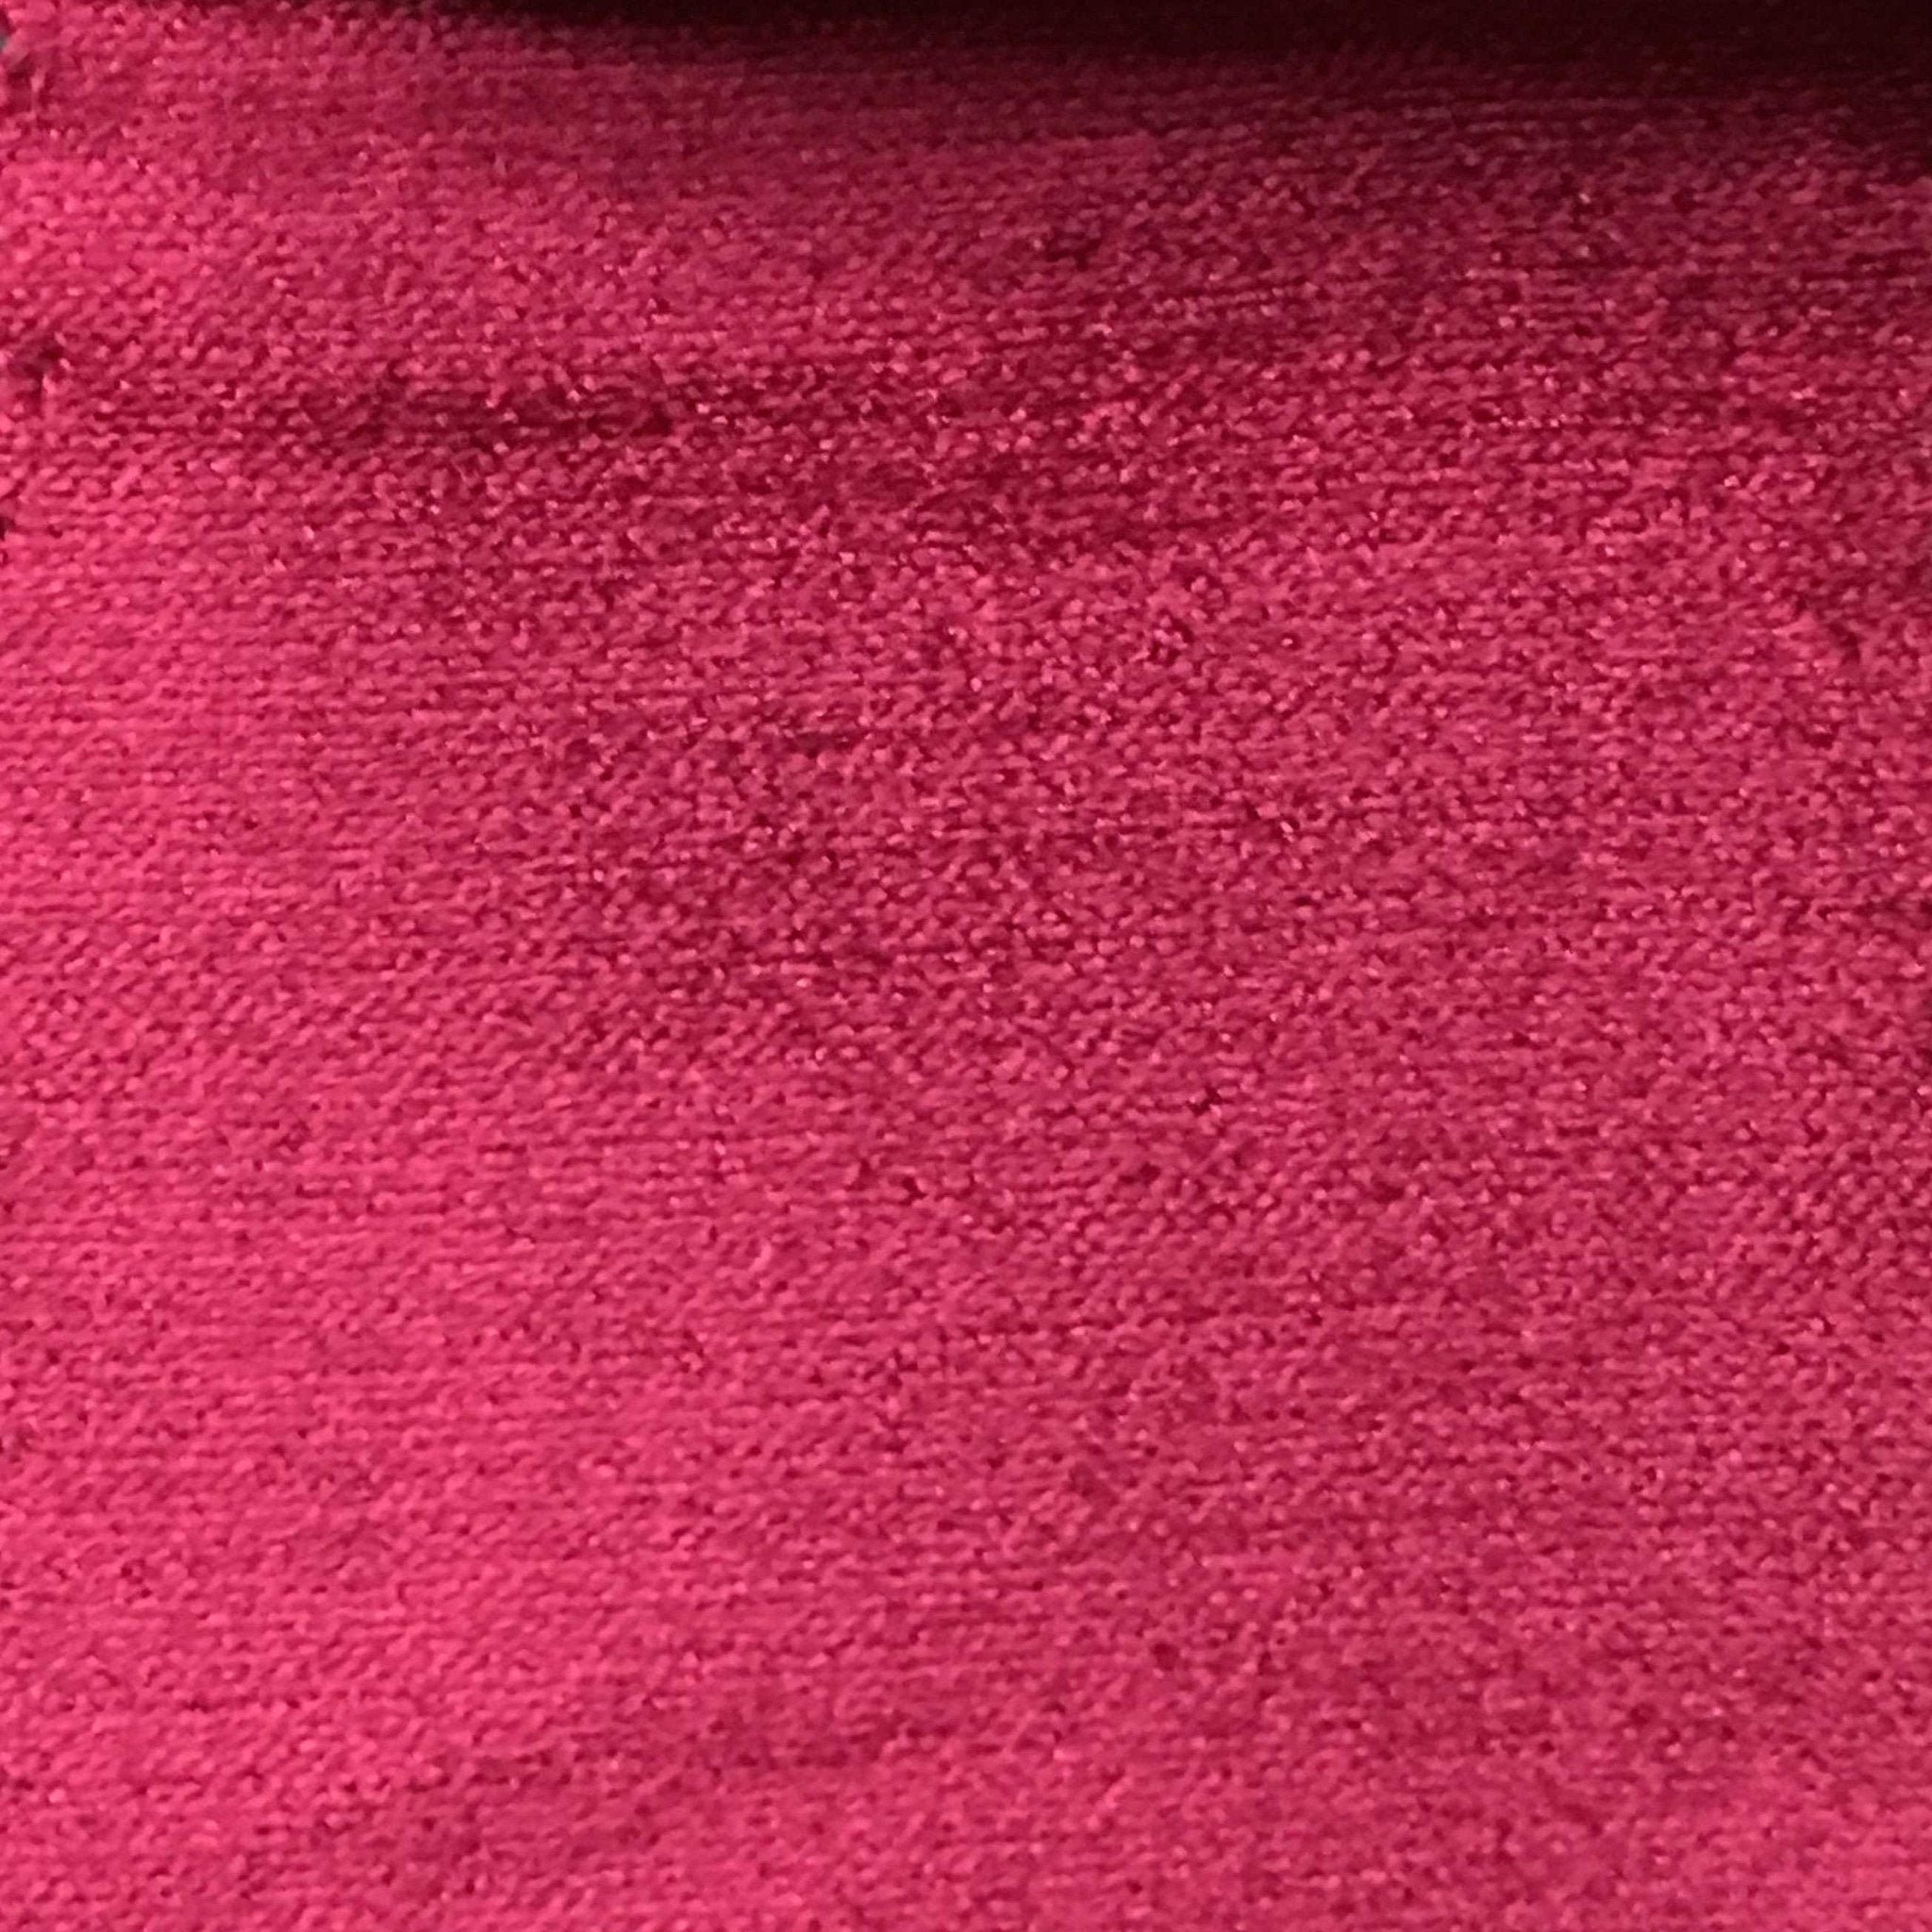 Fuchsia Pink Plain Solid Velvet Upholstery Fabric by The Yard